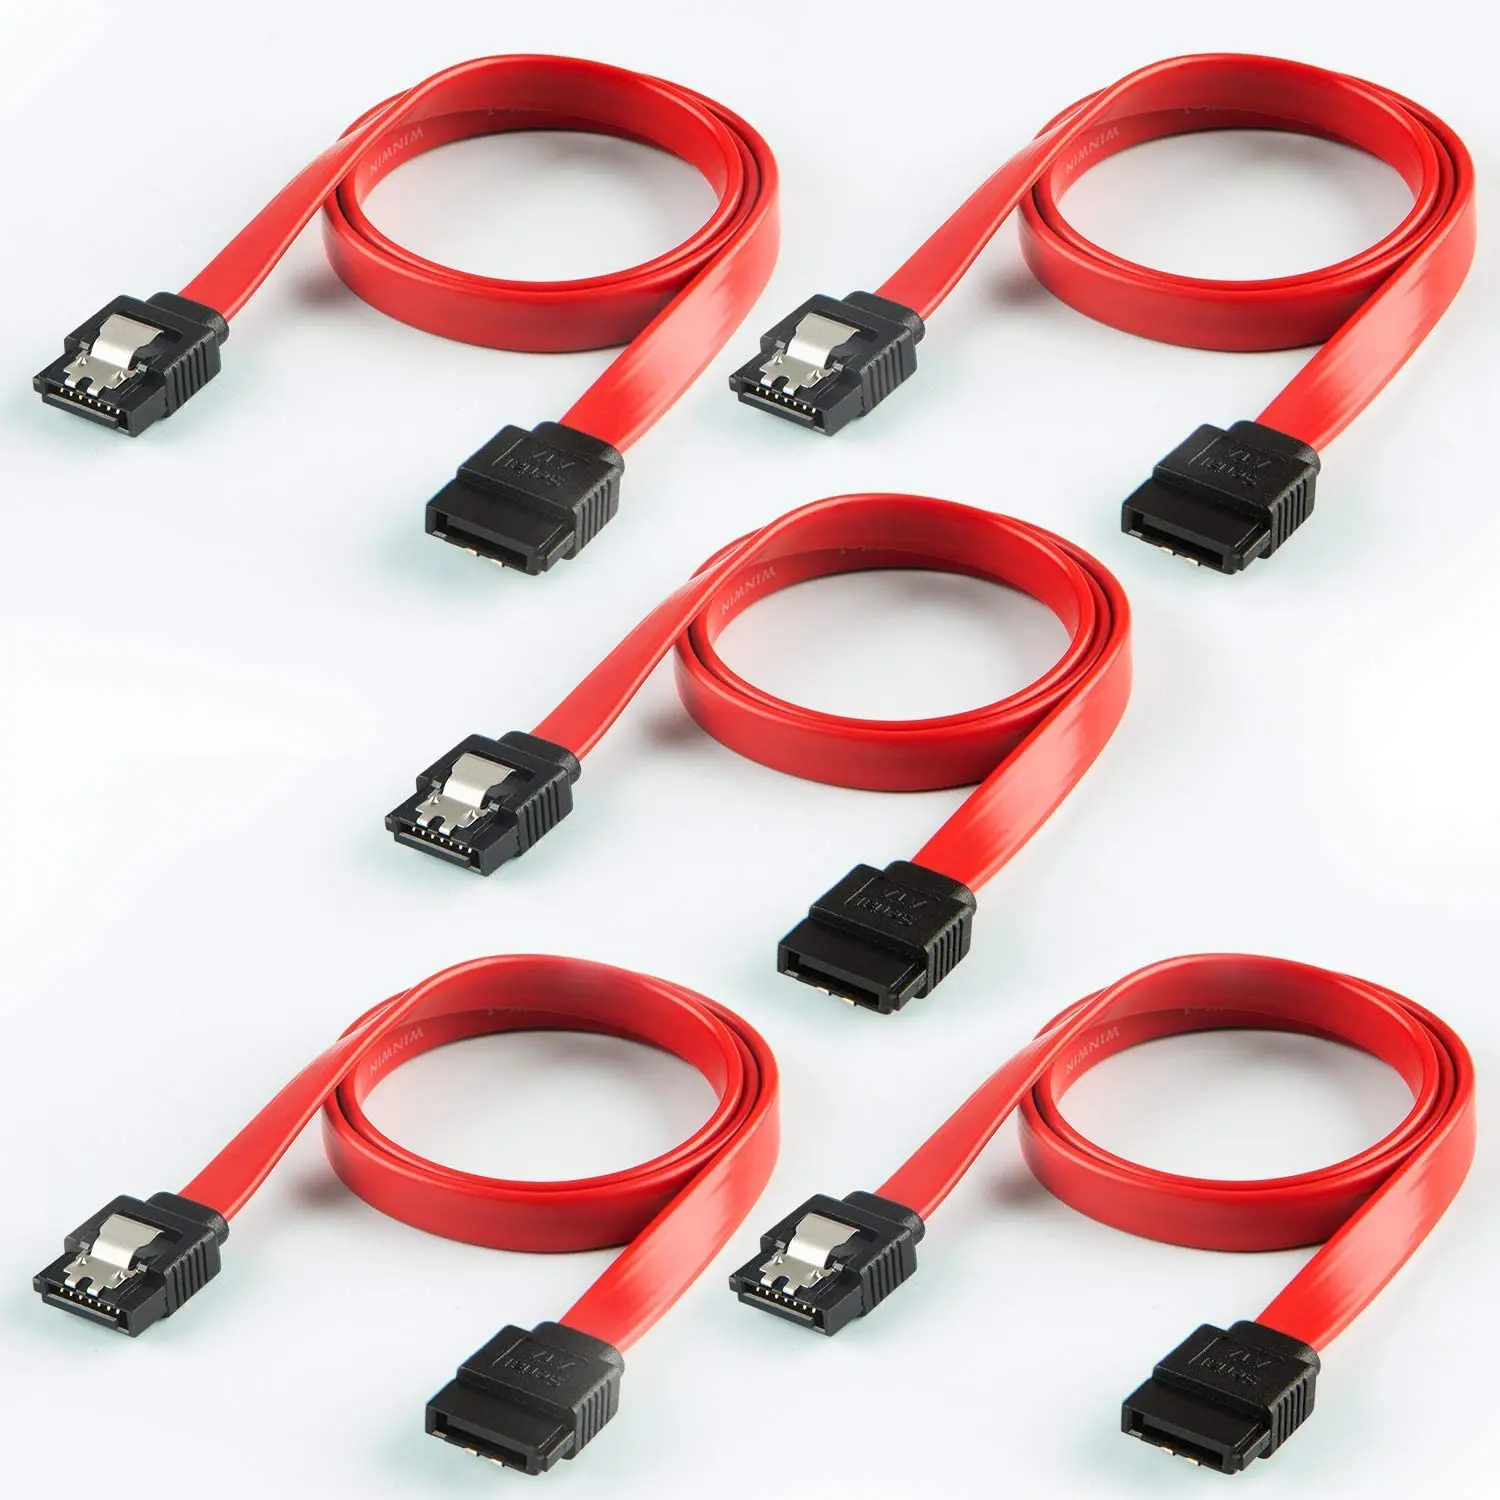 8-inch SATA III 6.0 Gbps Right Angle 7pin Female to Right Angle Female Data Cable with Locking Latch SATA III Cable Red CableCreation 2-Pack 